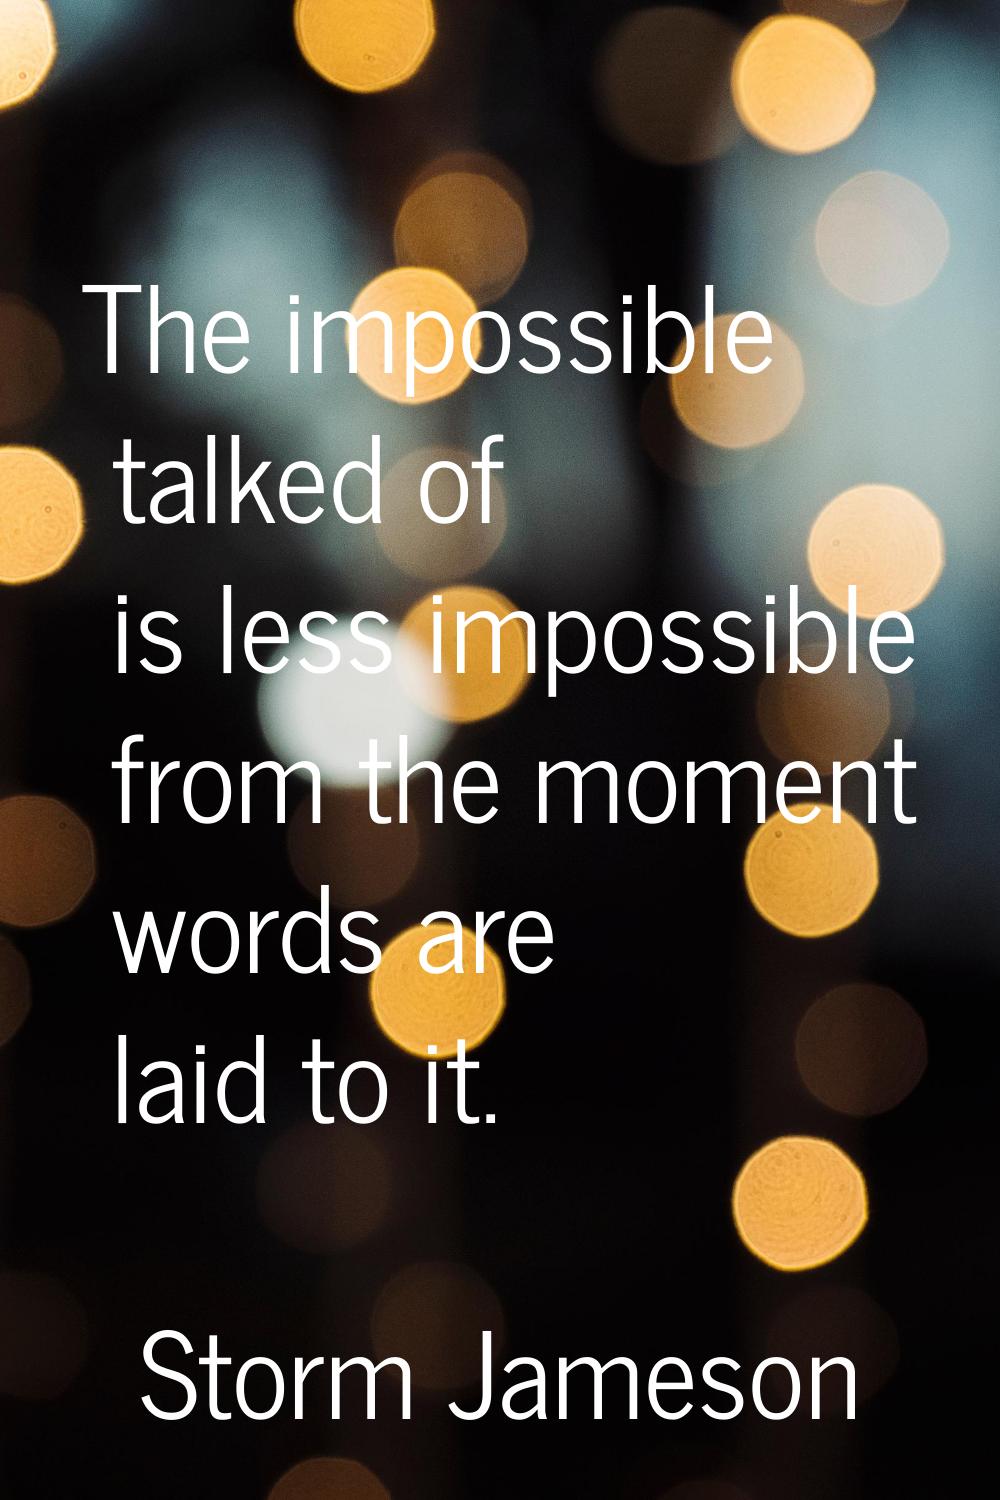 The impossible talked of is less impossible from the moment words are laid to it.